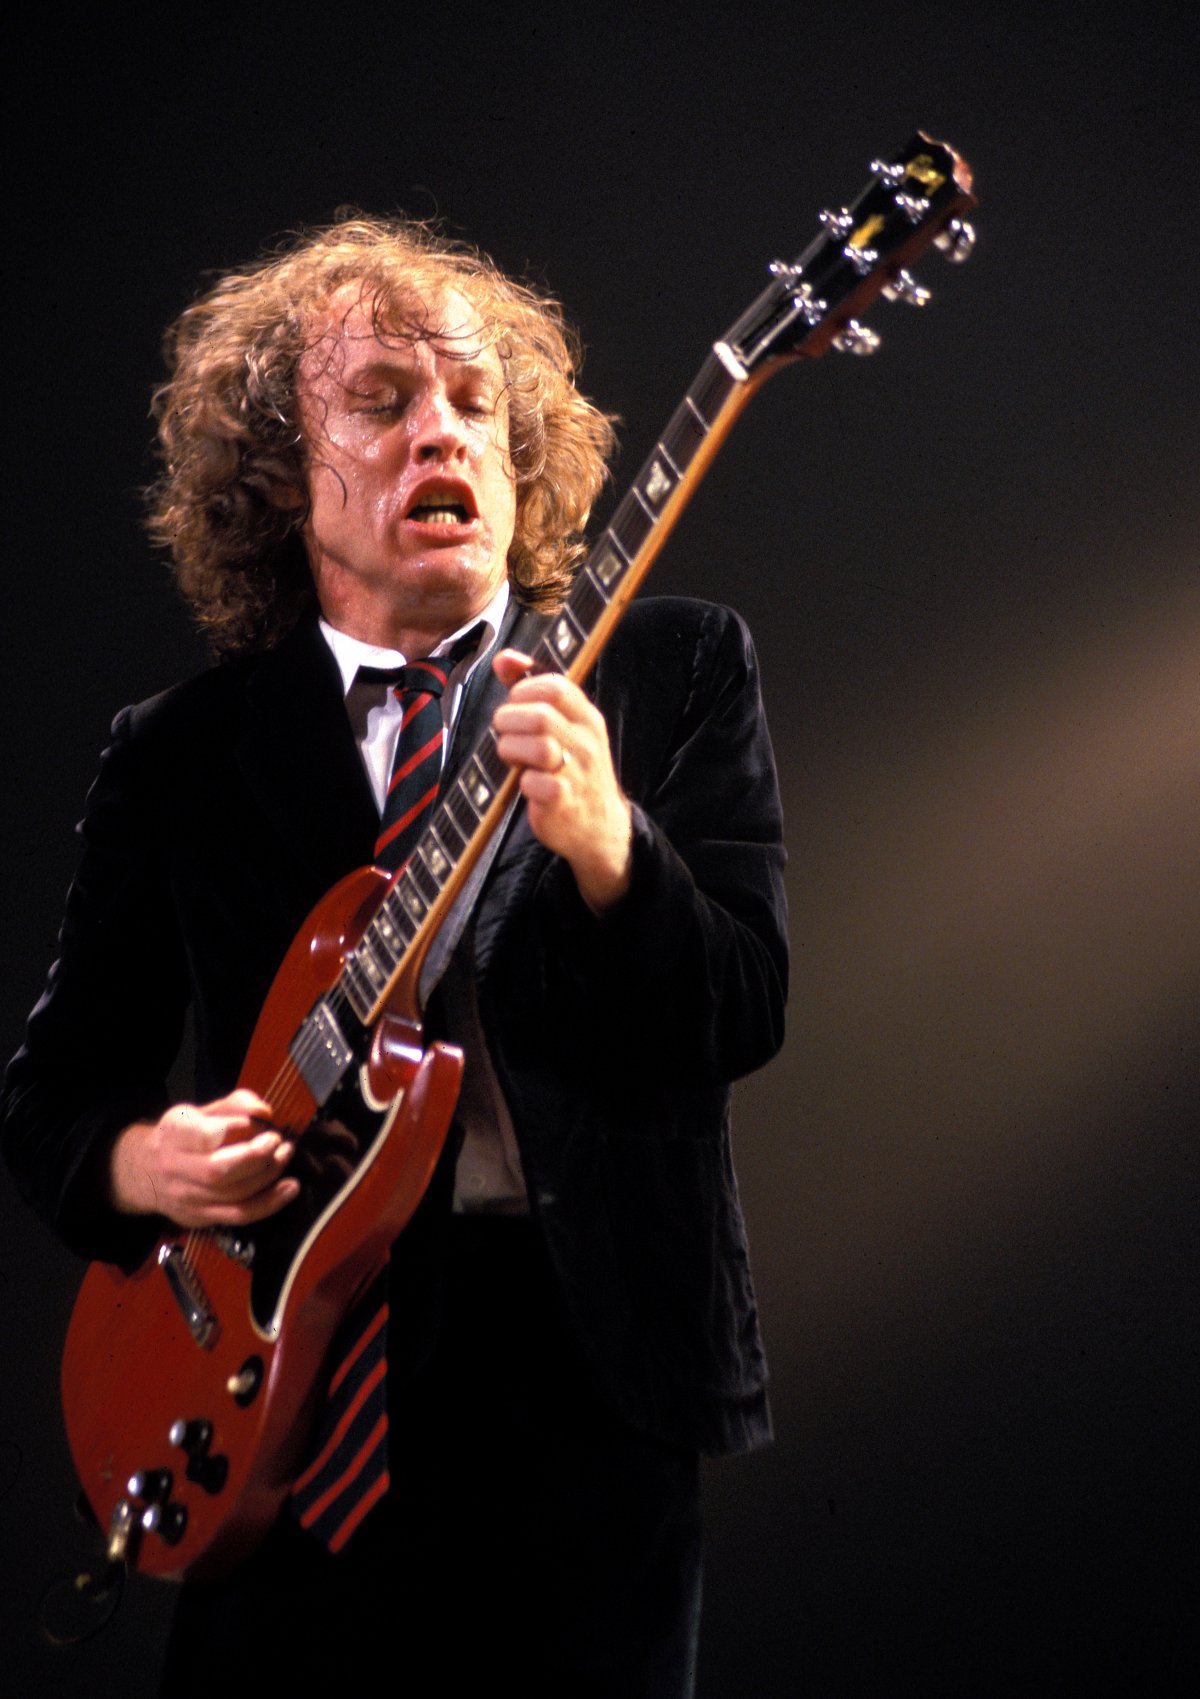 A man with long curly hair plays a guitar with great energy. He is very sweaty. The guitar is electric and has a red body. He is wearing a school uniform with a black blazer and a red and black striped tie